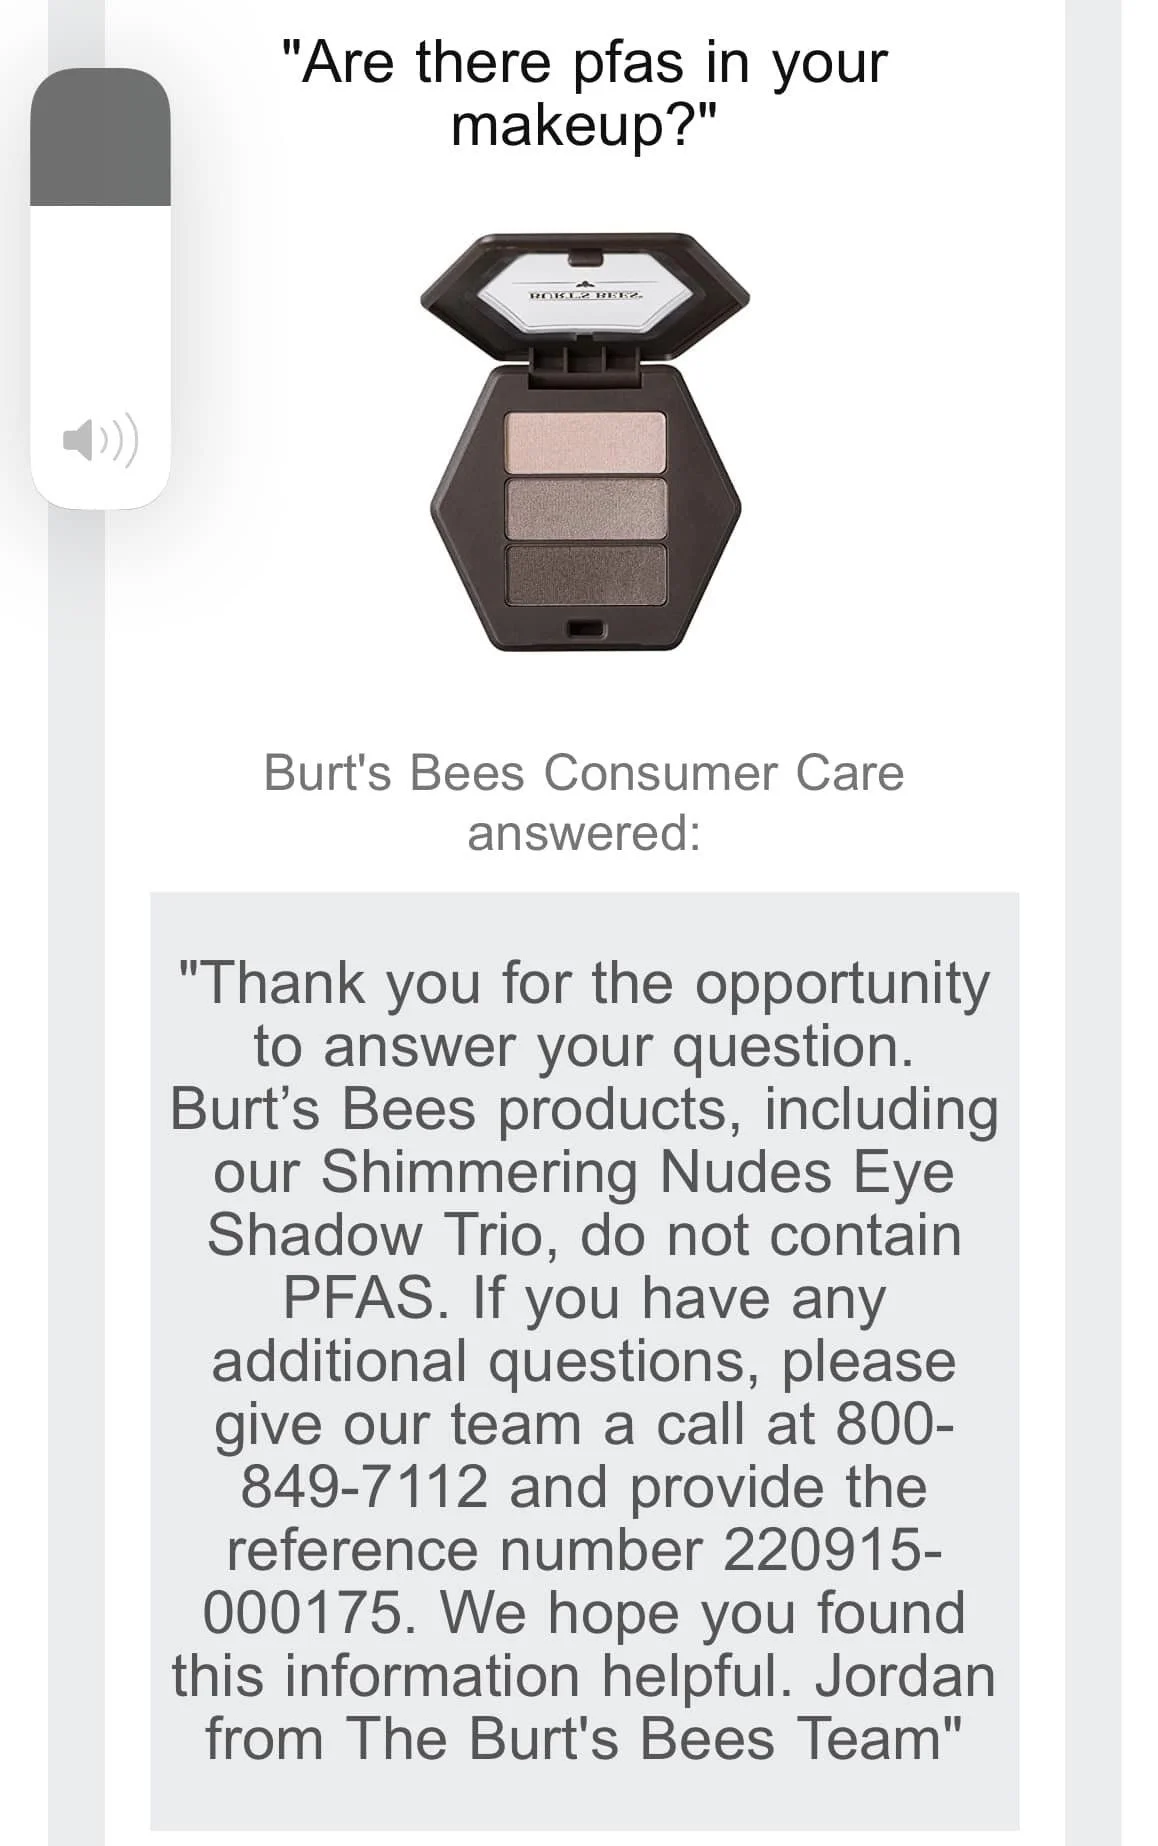 Burts Bees Communication about PFAS to customer